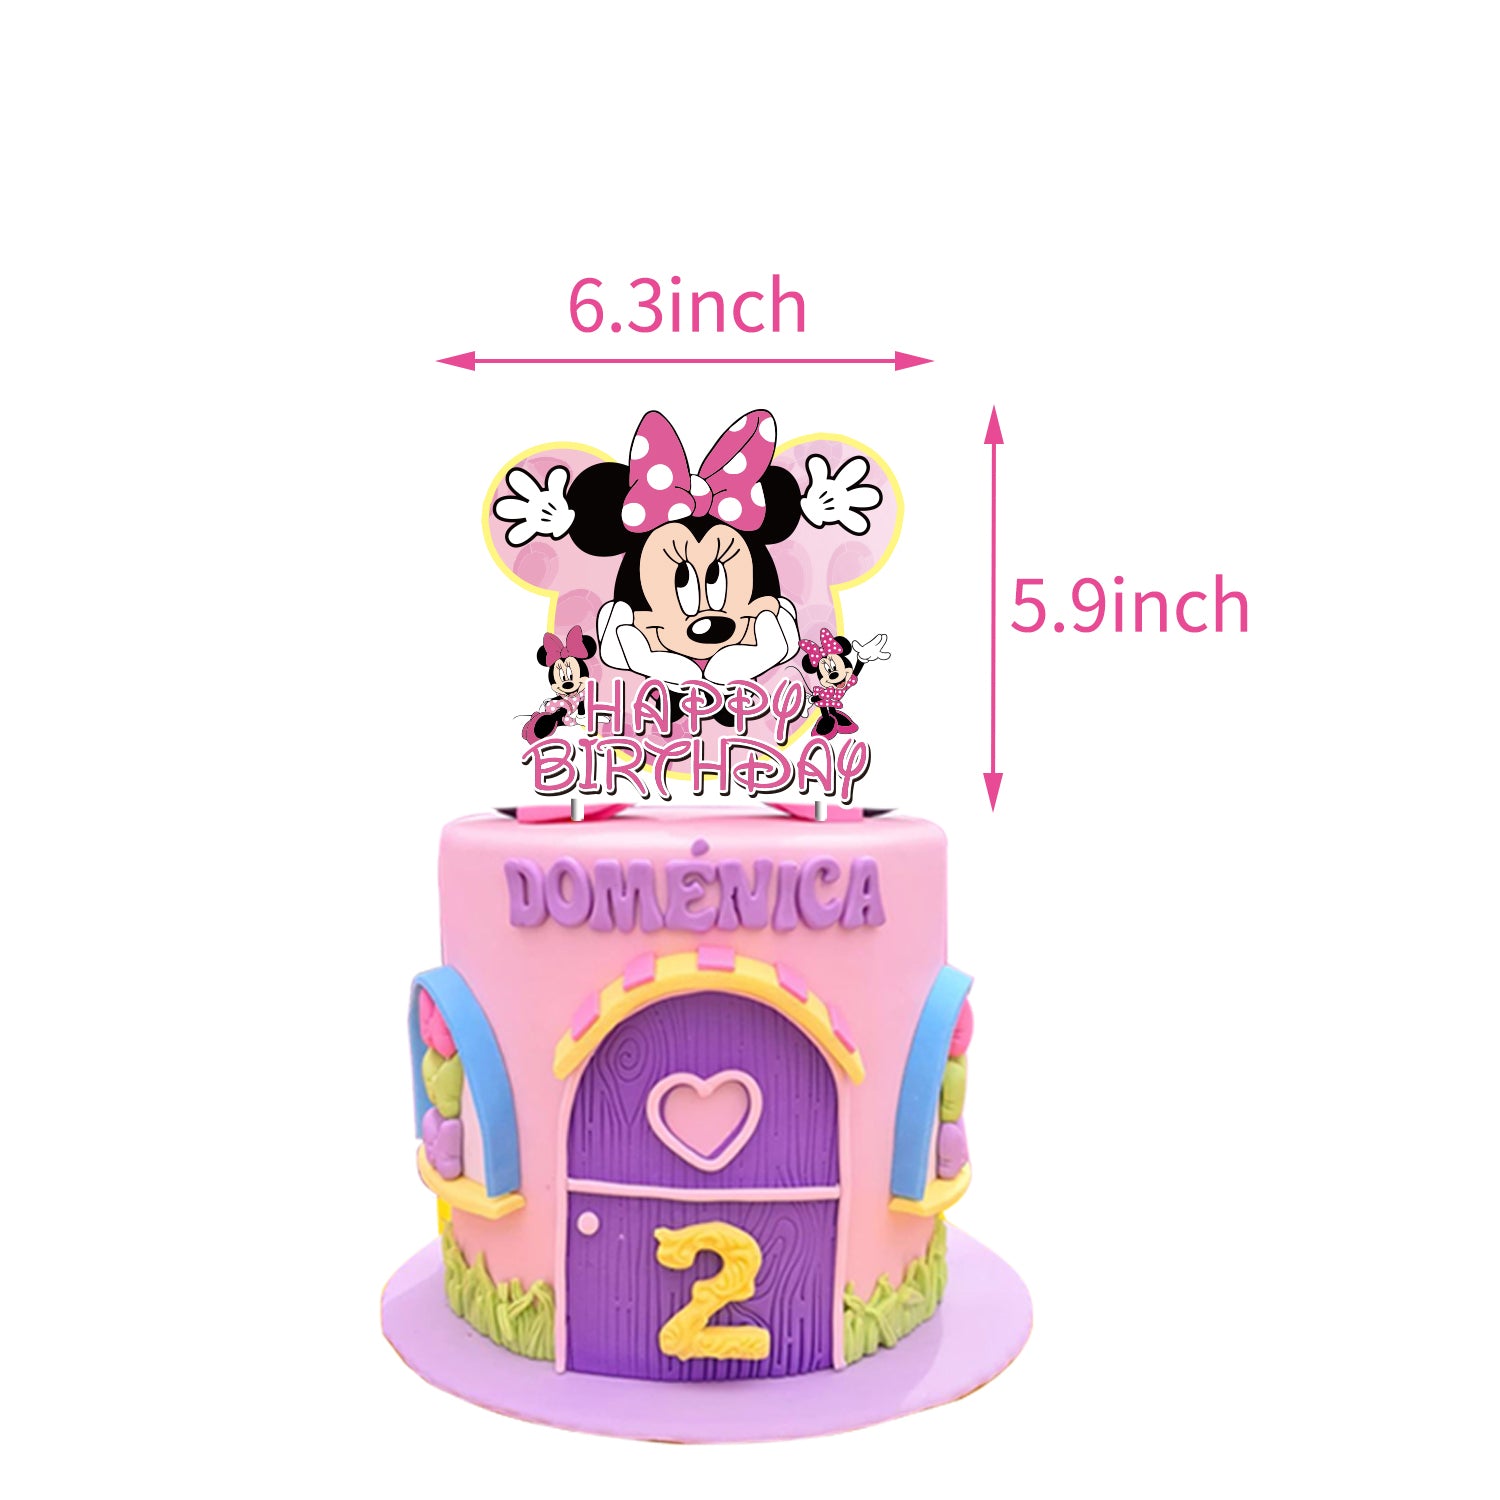 Minnie Mouse Birthday Party Decorations.